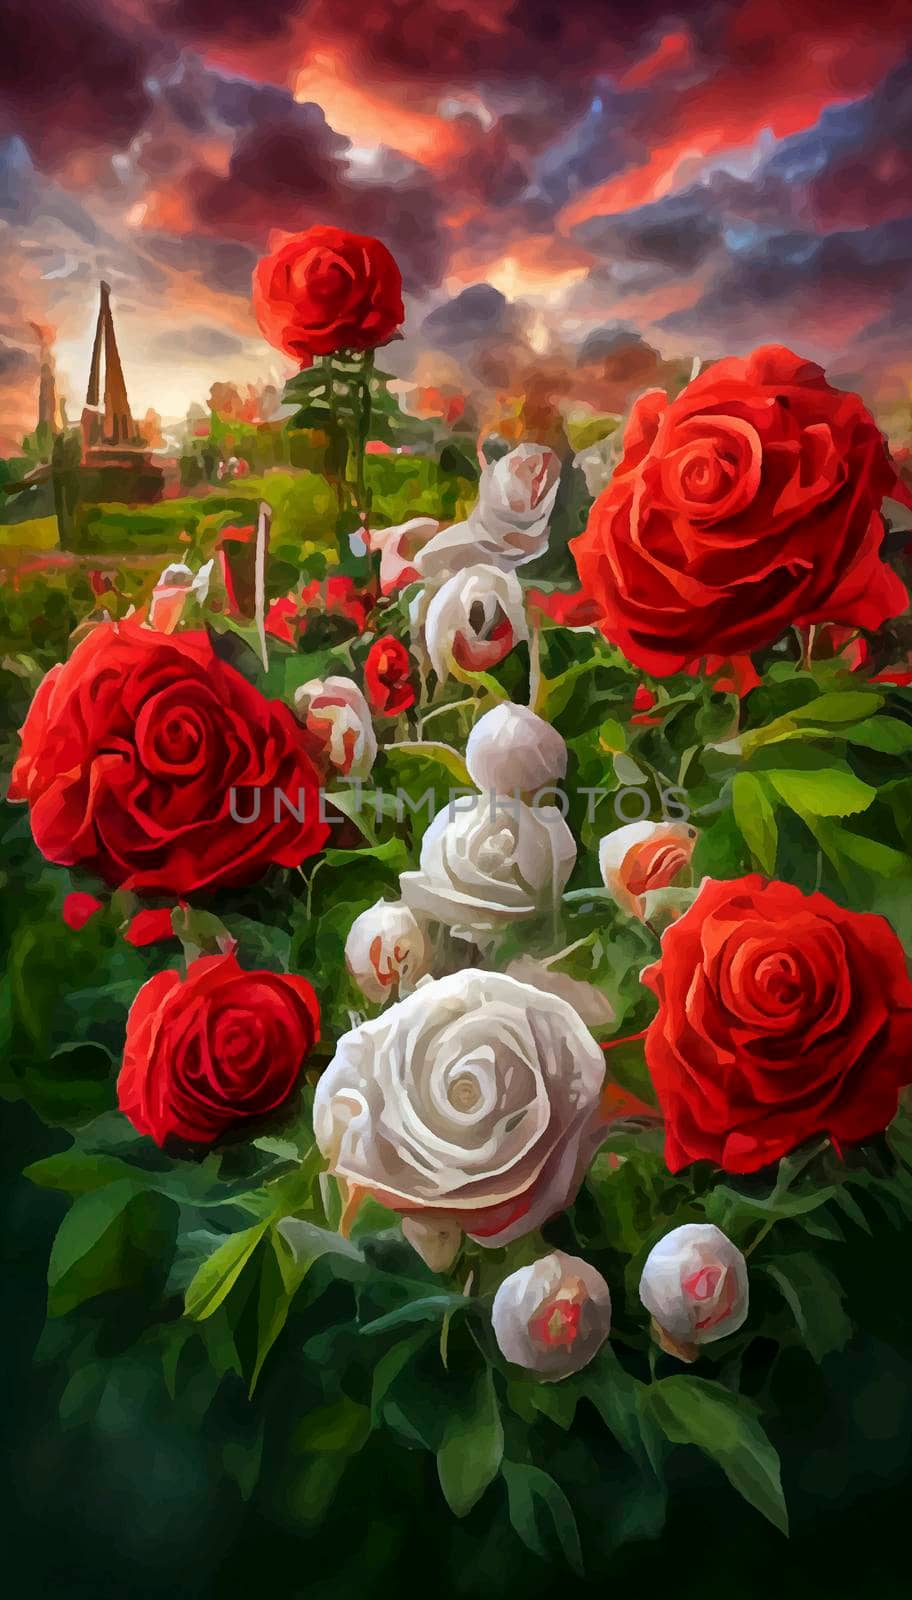 red and white roses under the colorful sky. roses with castle and sunset in the background by JpRamos